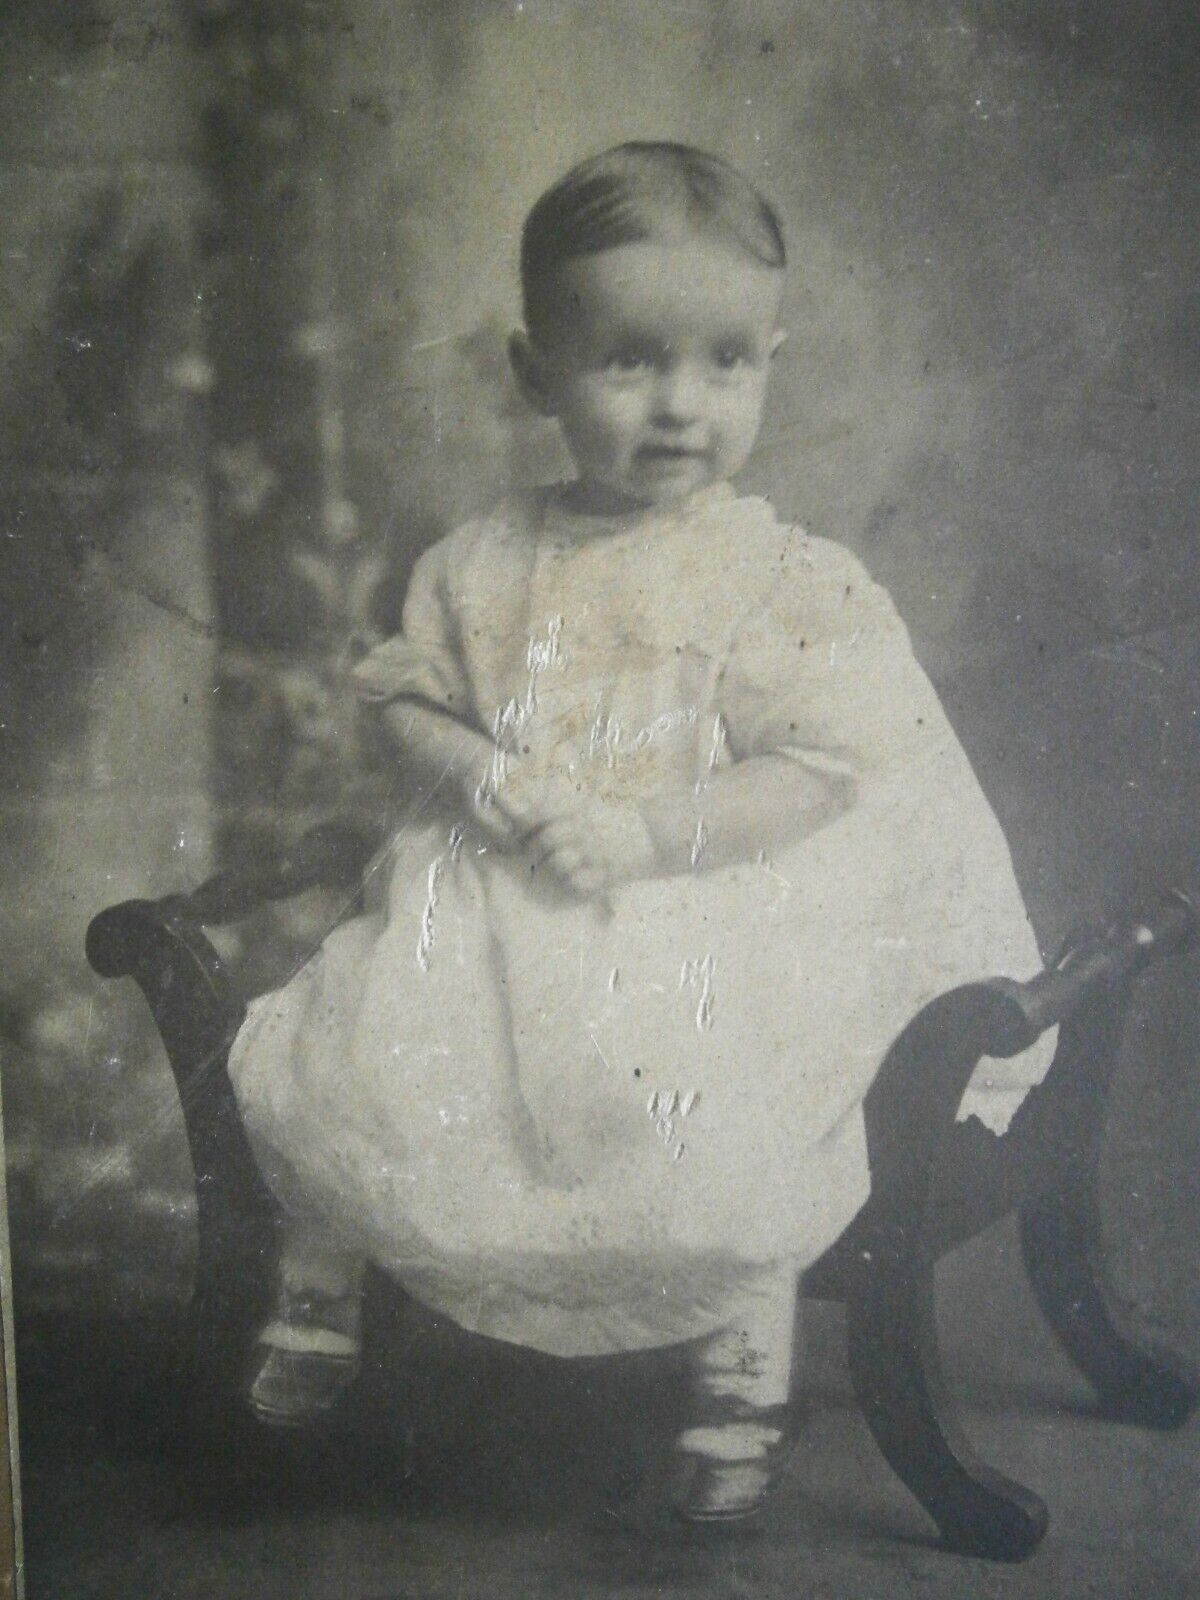 Early Image of Identified Young Child by ALLUP STUDIO CO., Poughkeepsie, NY